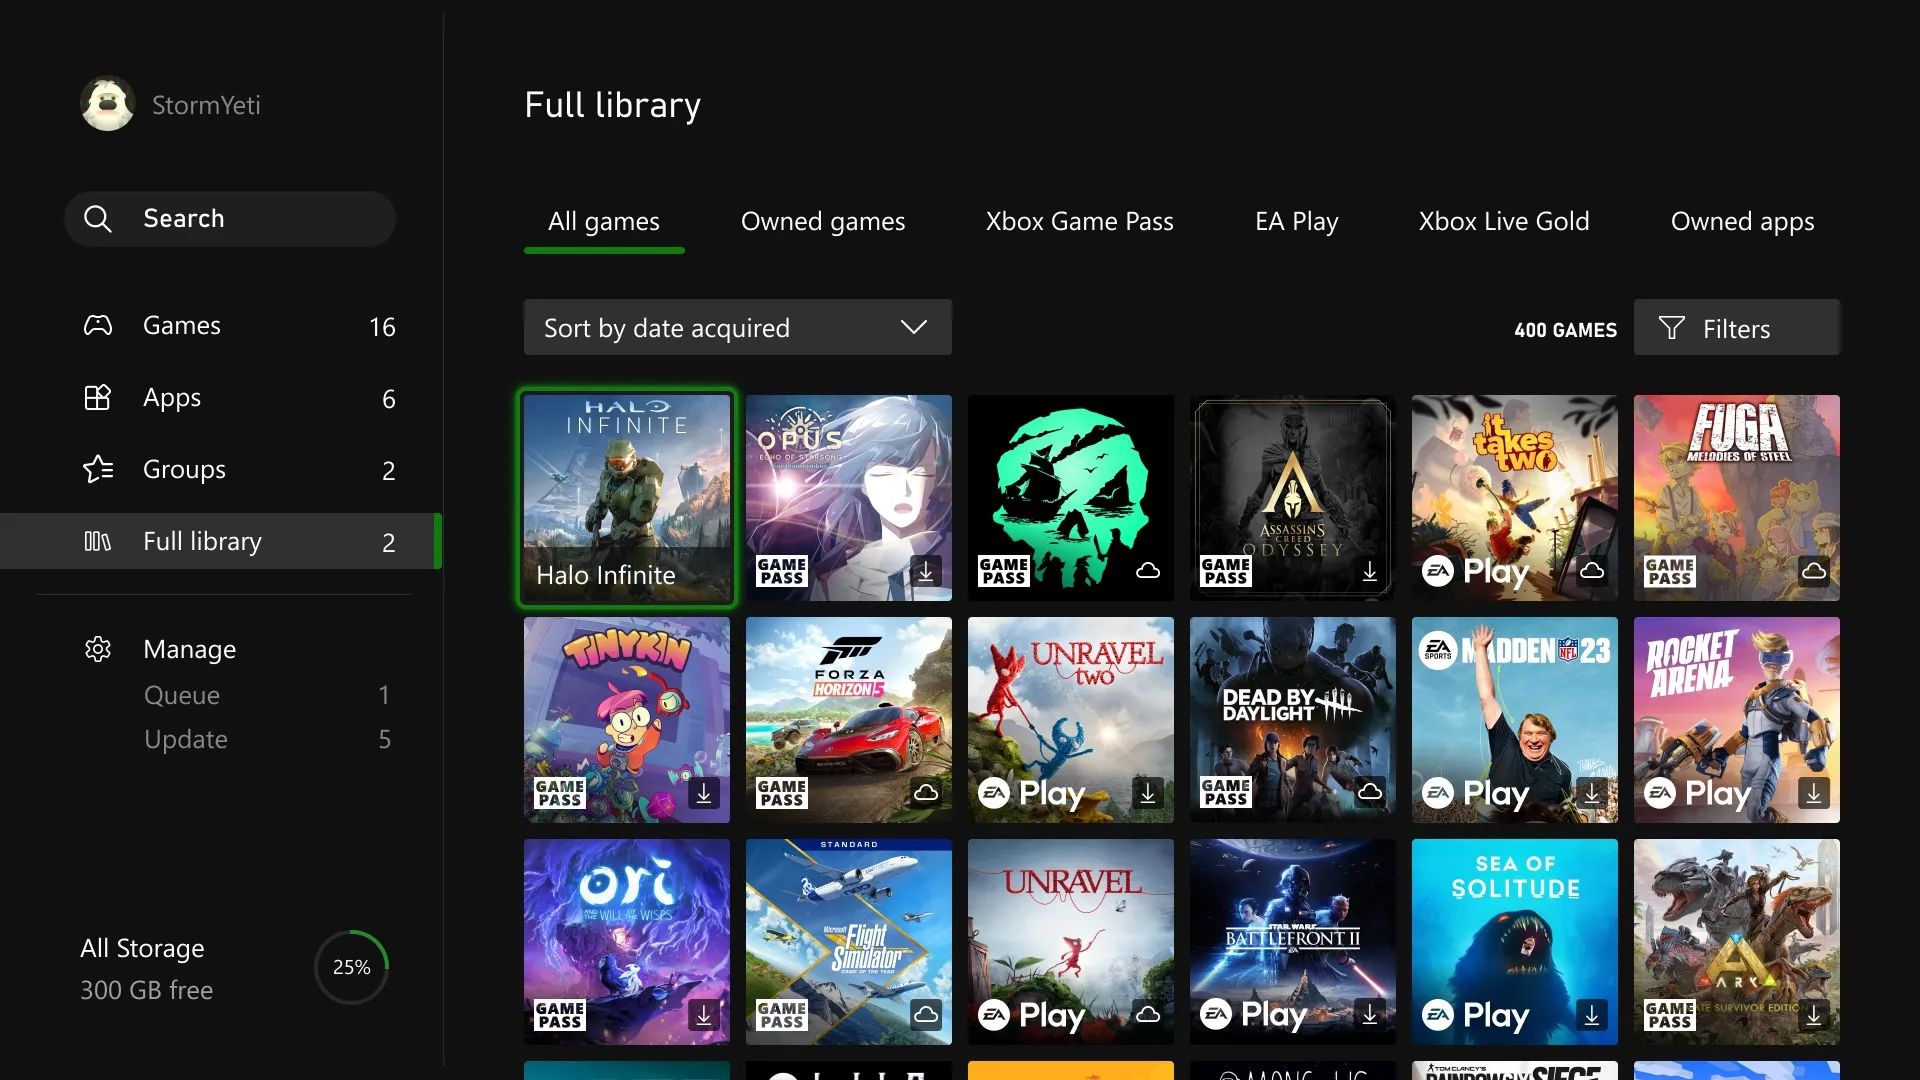 Xbox Series X: Image Gallery (List View)